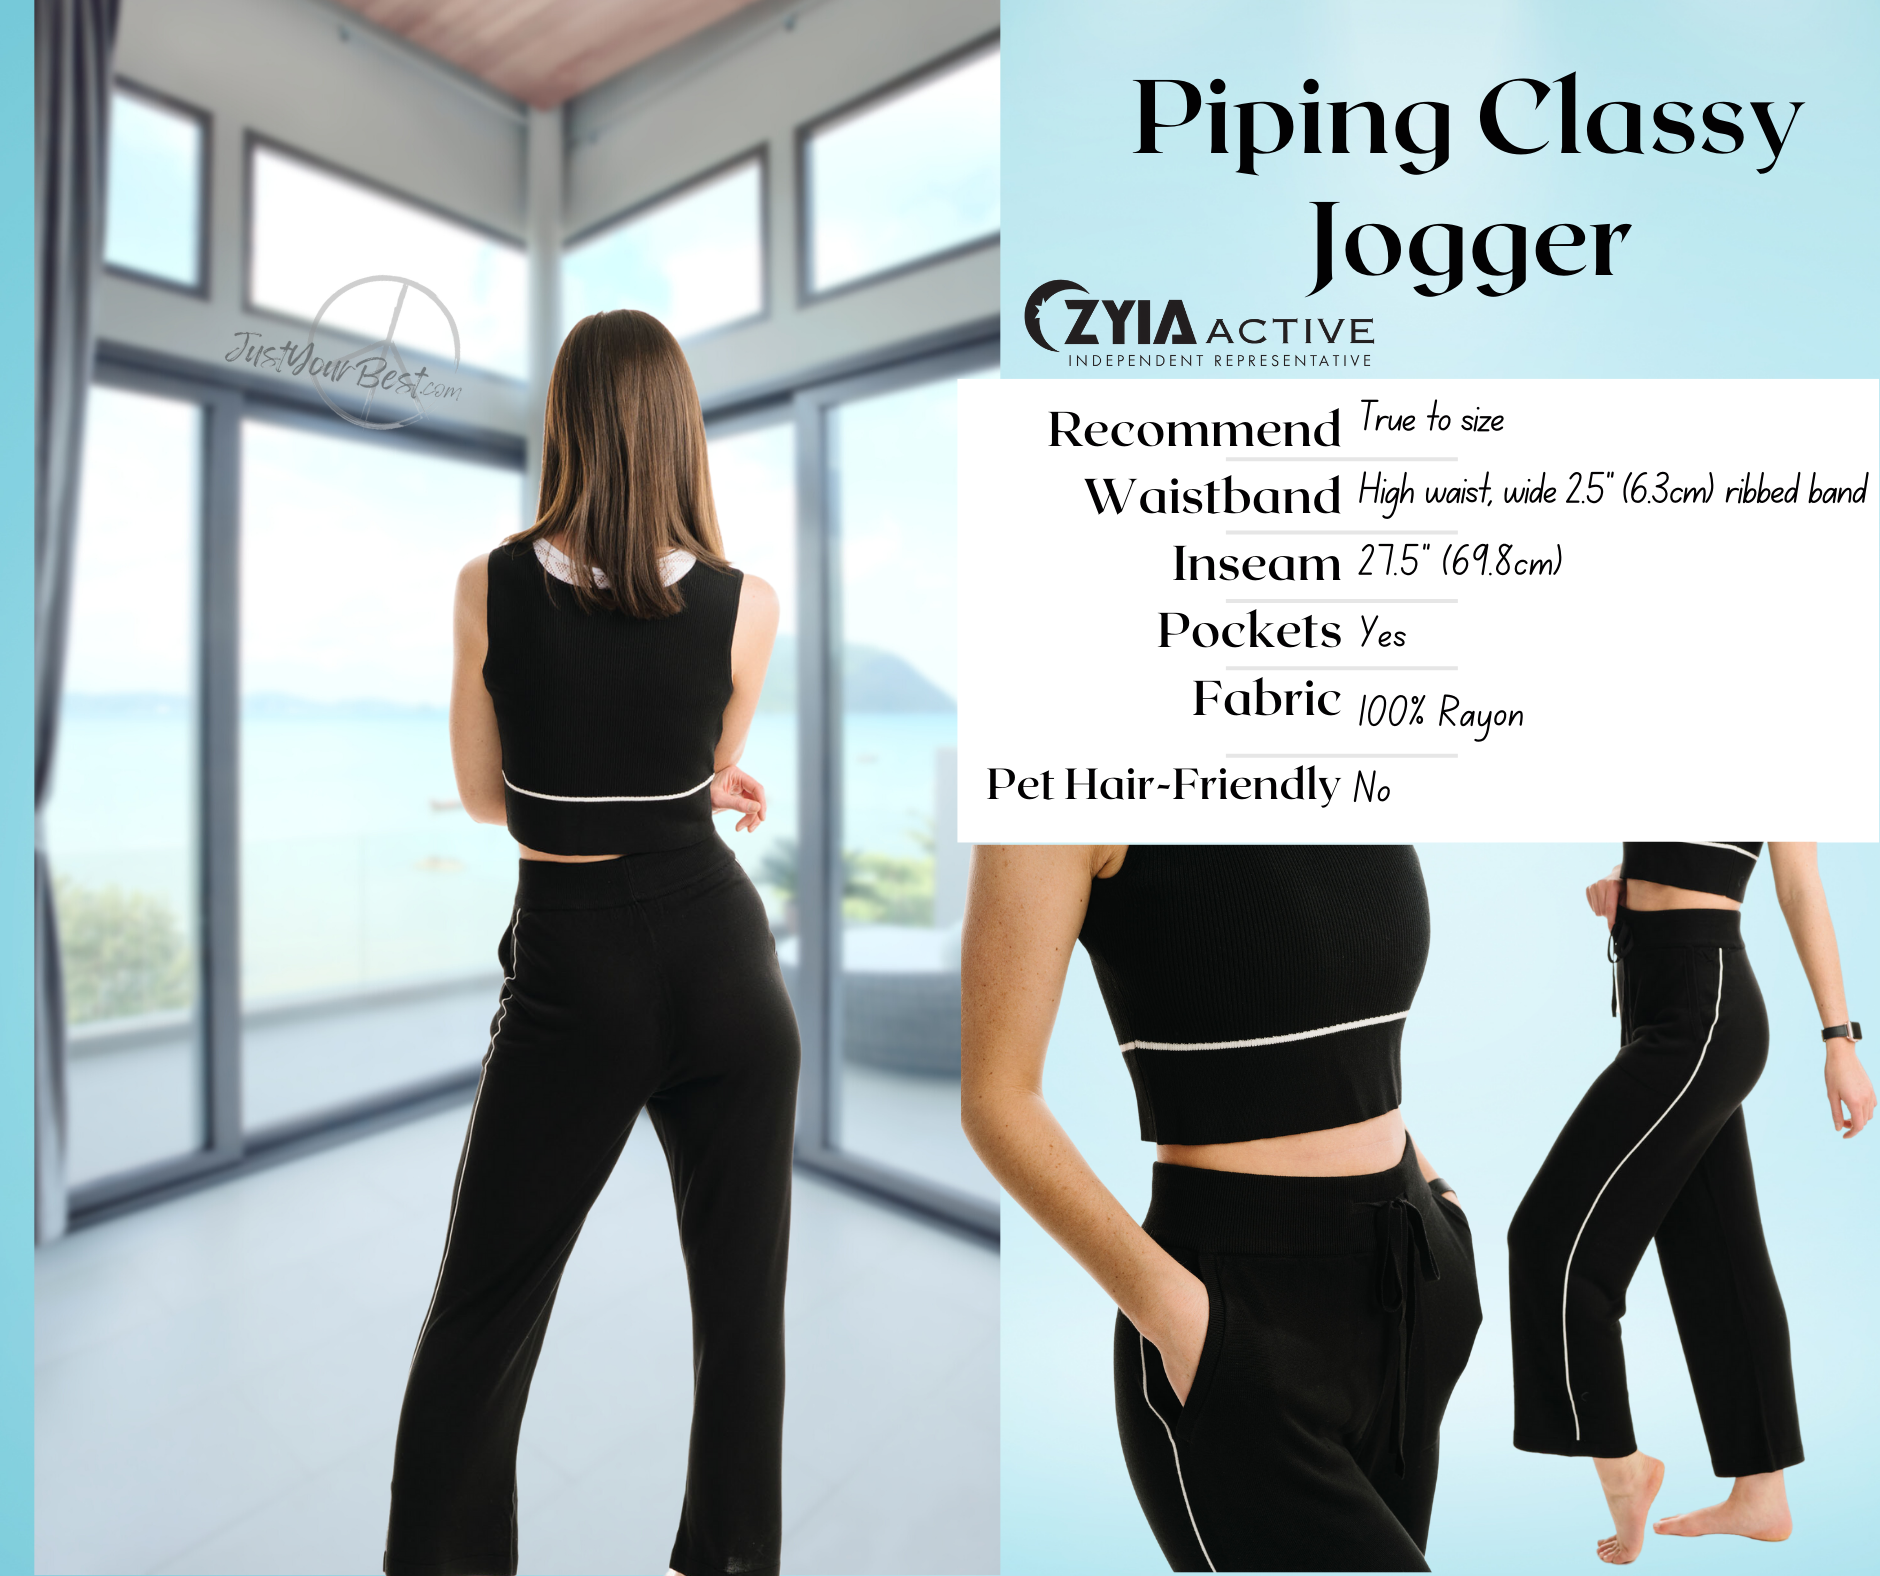 Zyia Jogger in a Bottle 2 in Lilac and Black